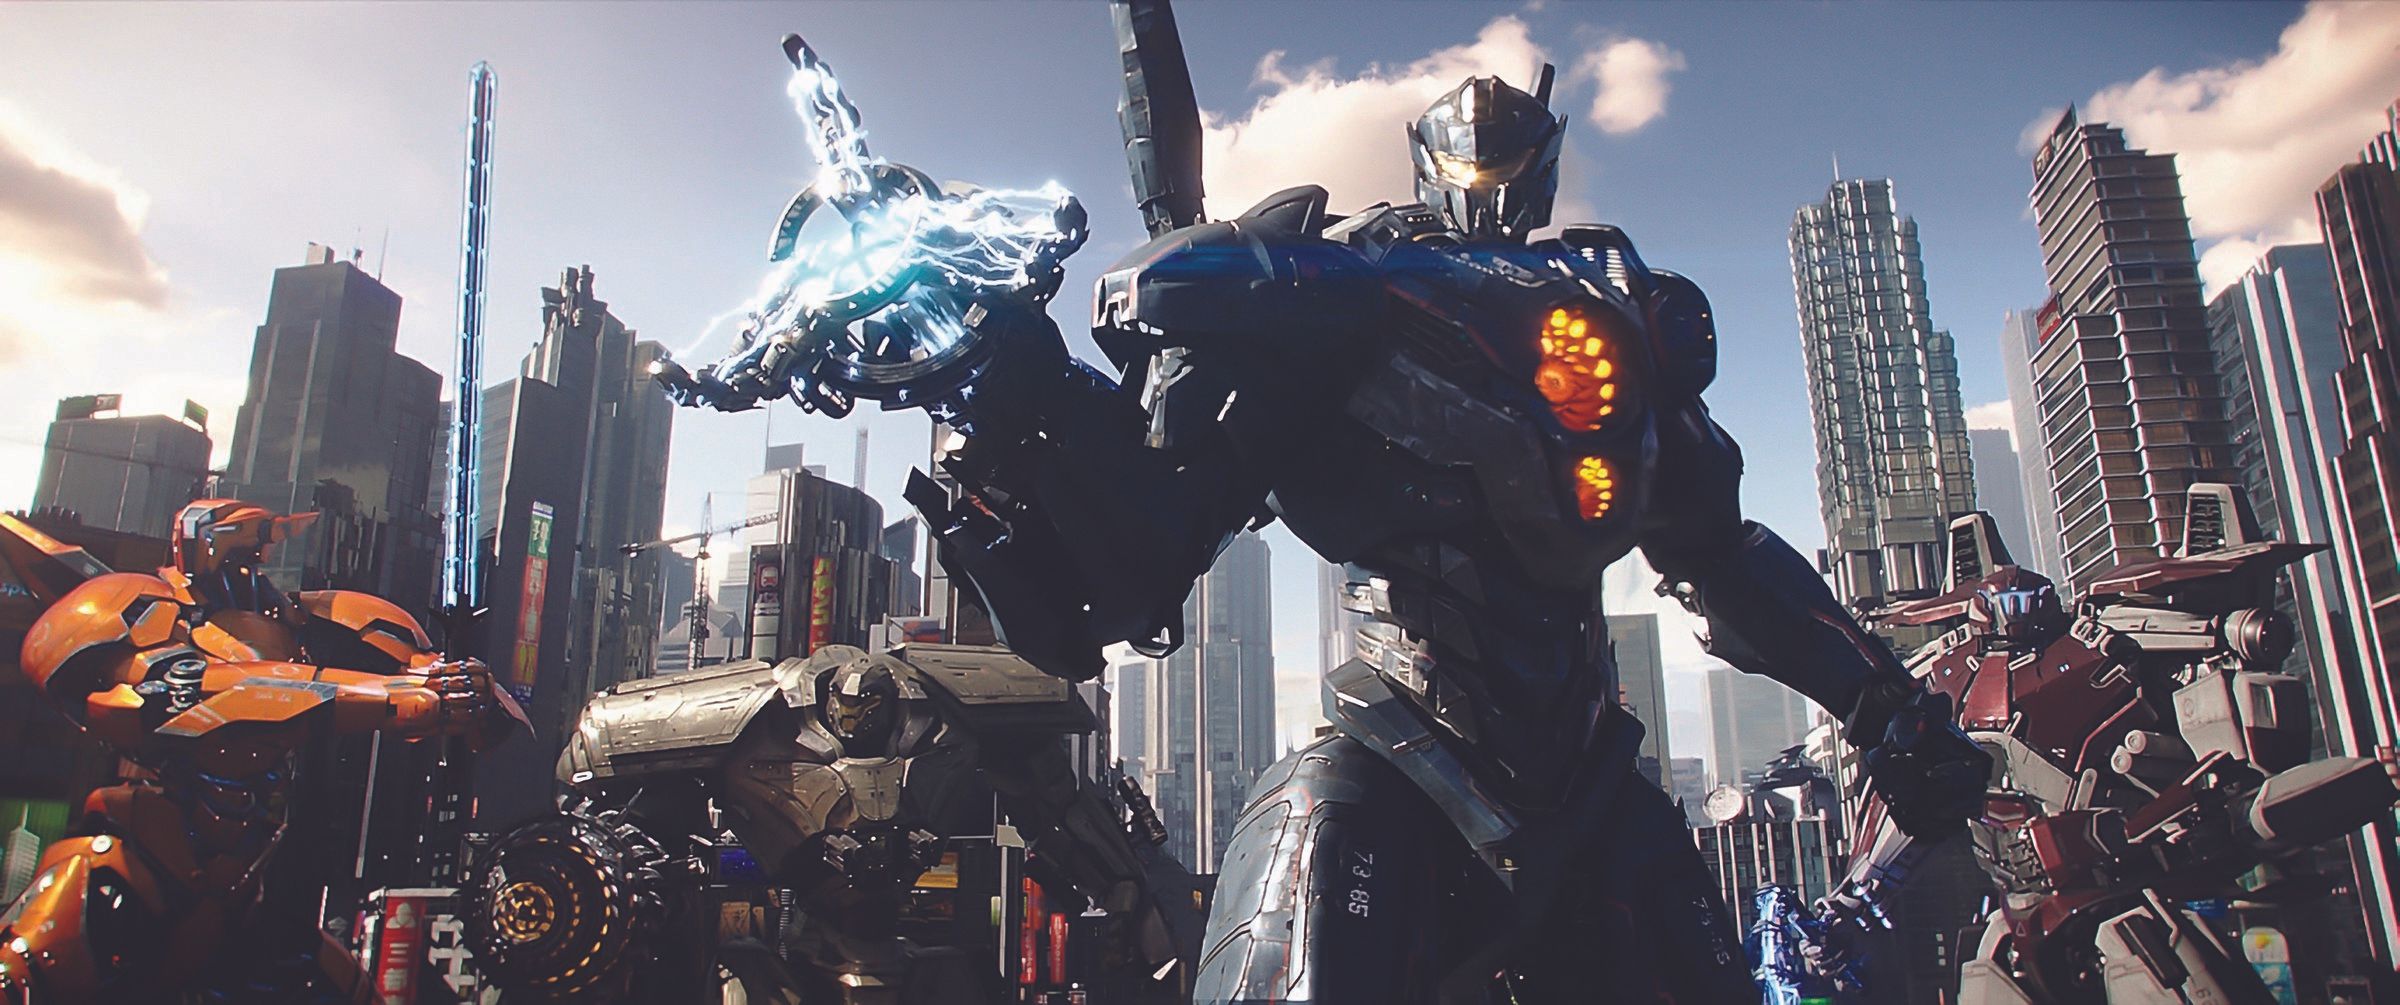 Pacific Rim Uprising': Saving the world is serious, and silly